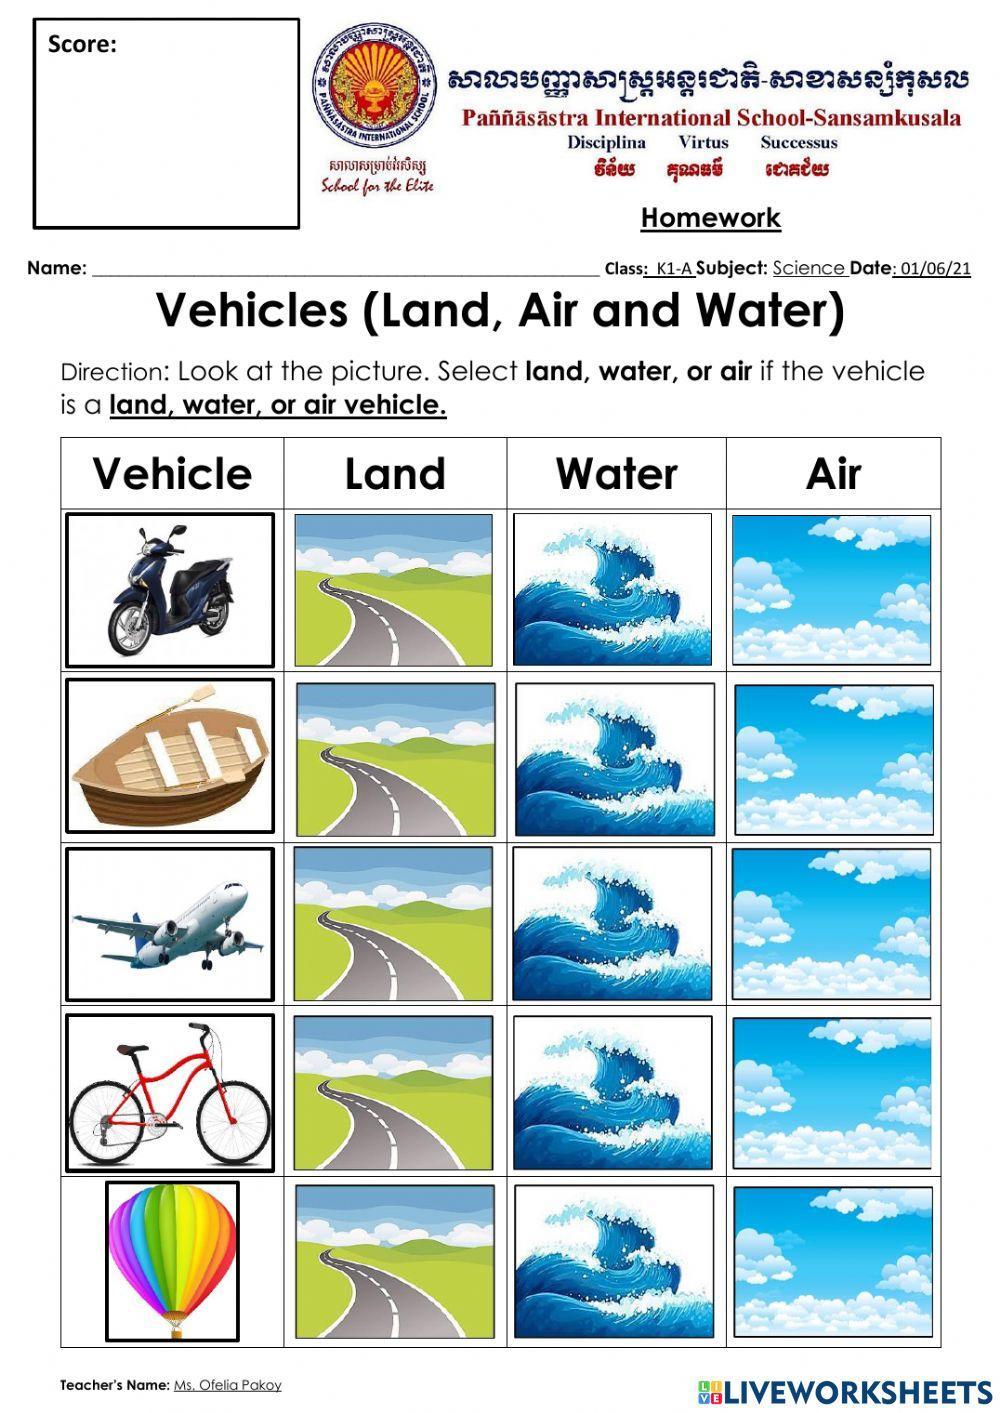 Vehicles(Land, Water and Air)